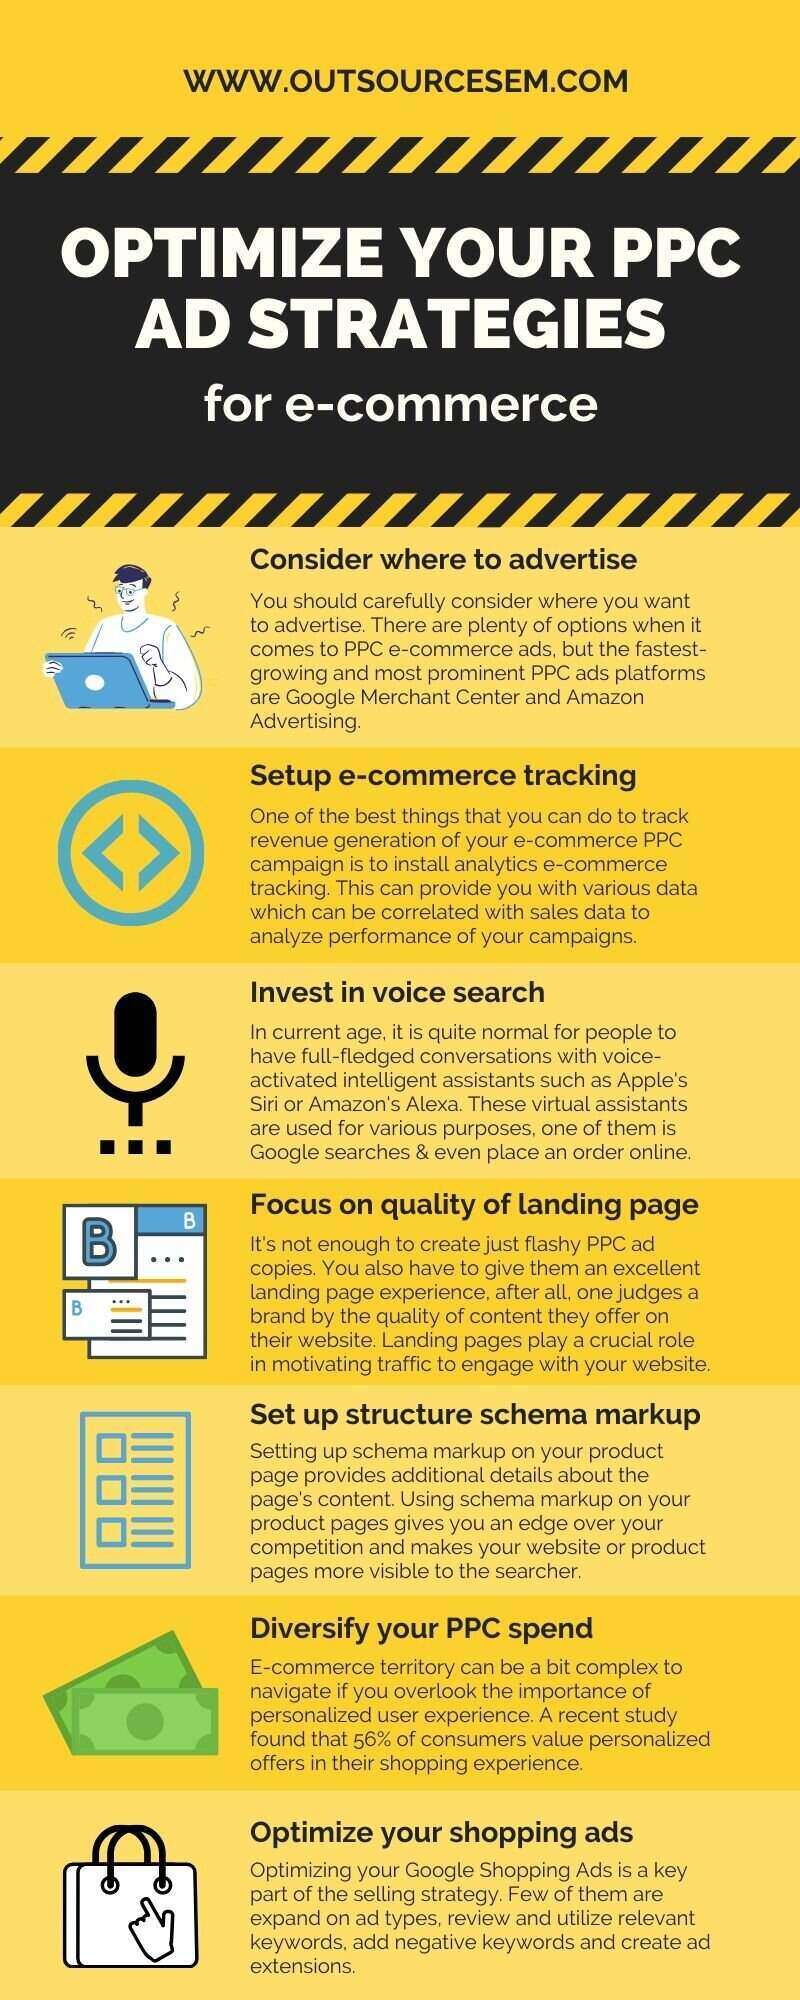 optimize-your-ppc-ad-strategies-for-e-commerce-infographic